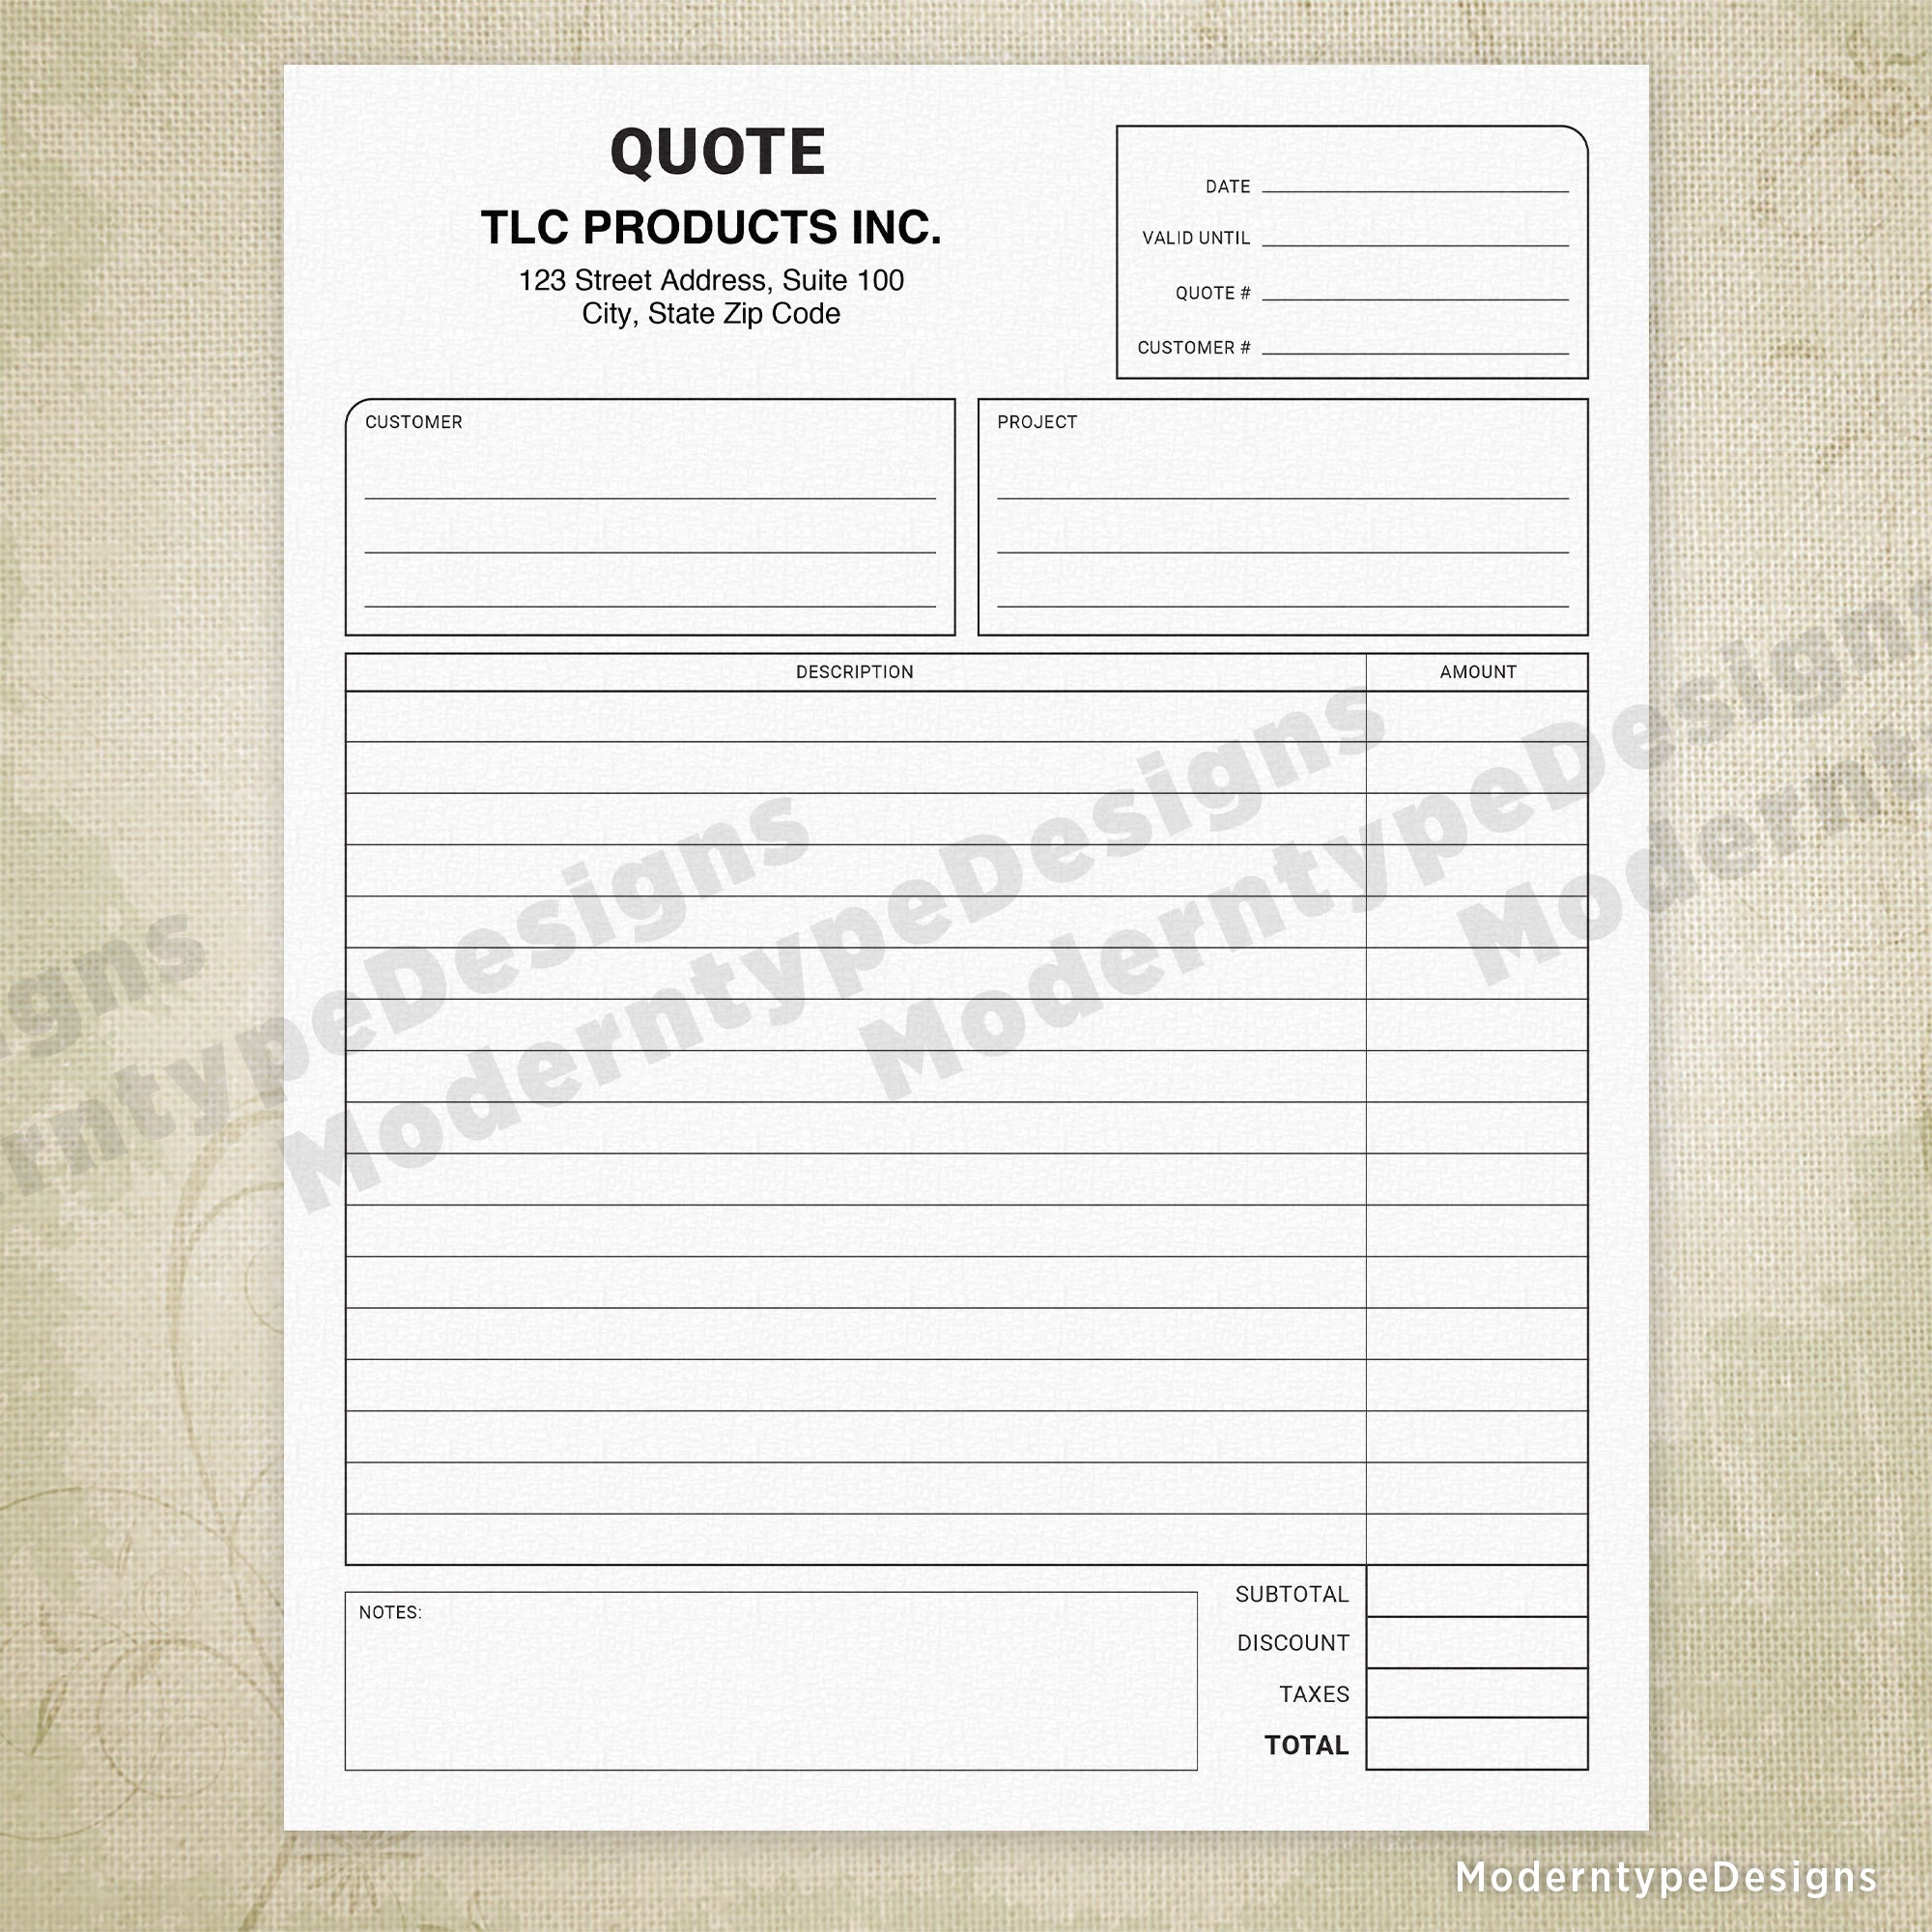 Price Quote Printable Form with Lines, Editable, #2